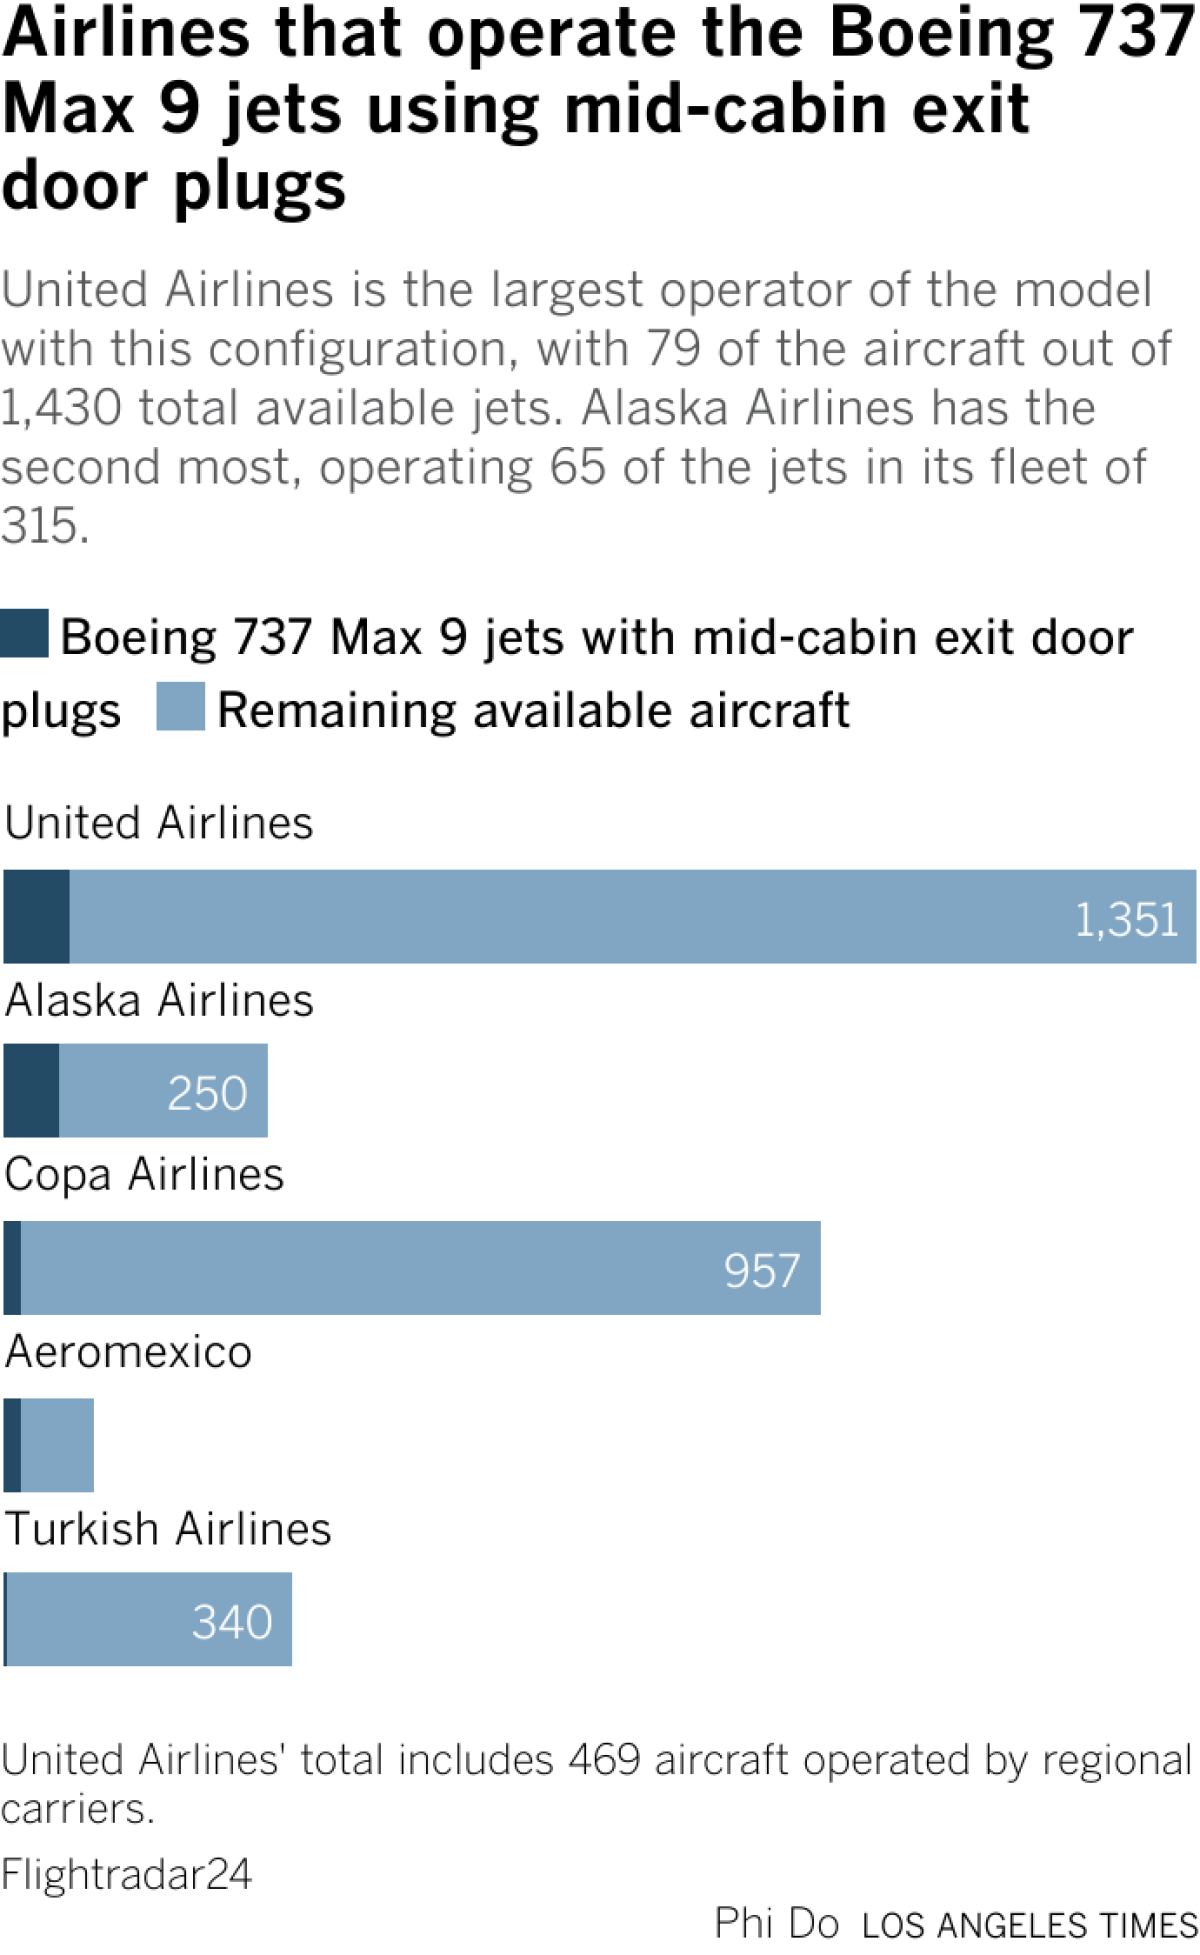 United Airlines is the largest operator of the model with this configuration, with 79 of the aircraft of the total 1,430 jets available.  Alaska Airlines has the second most aircraft, with 65 aircraft in its fleet of 315.